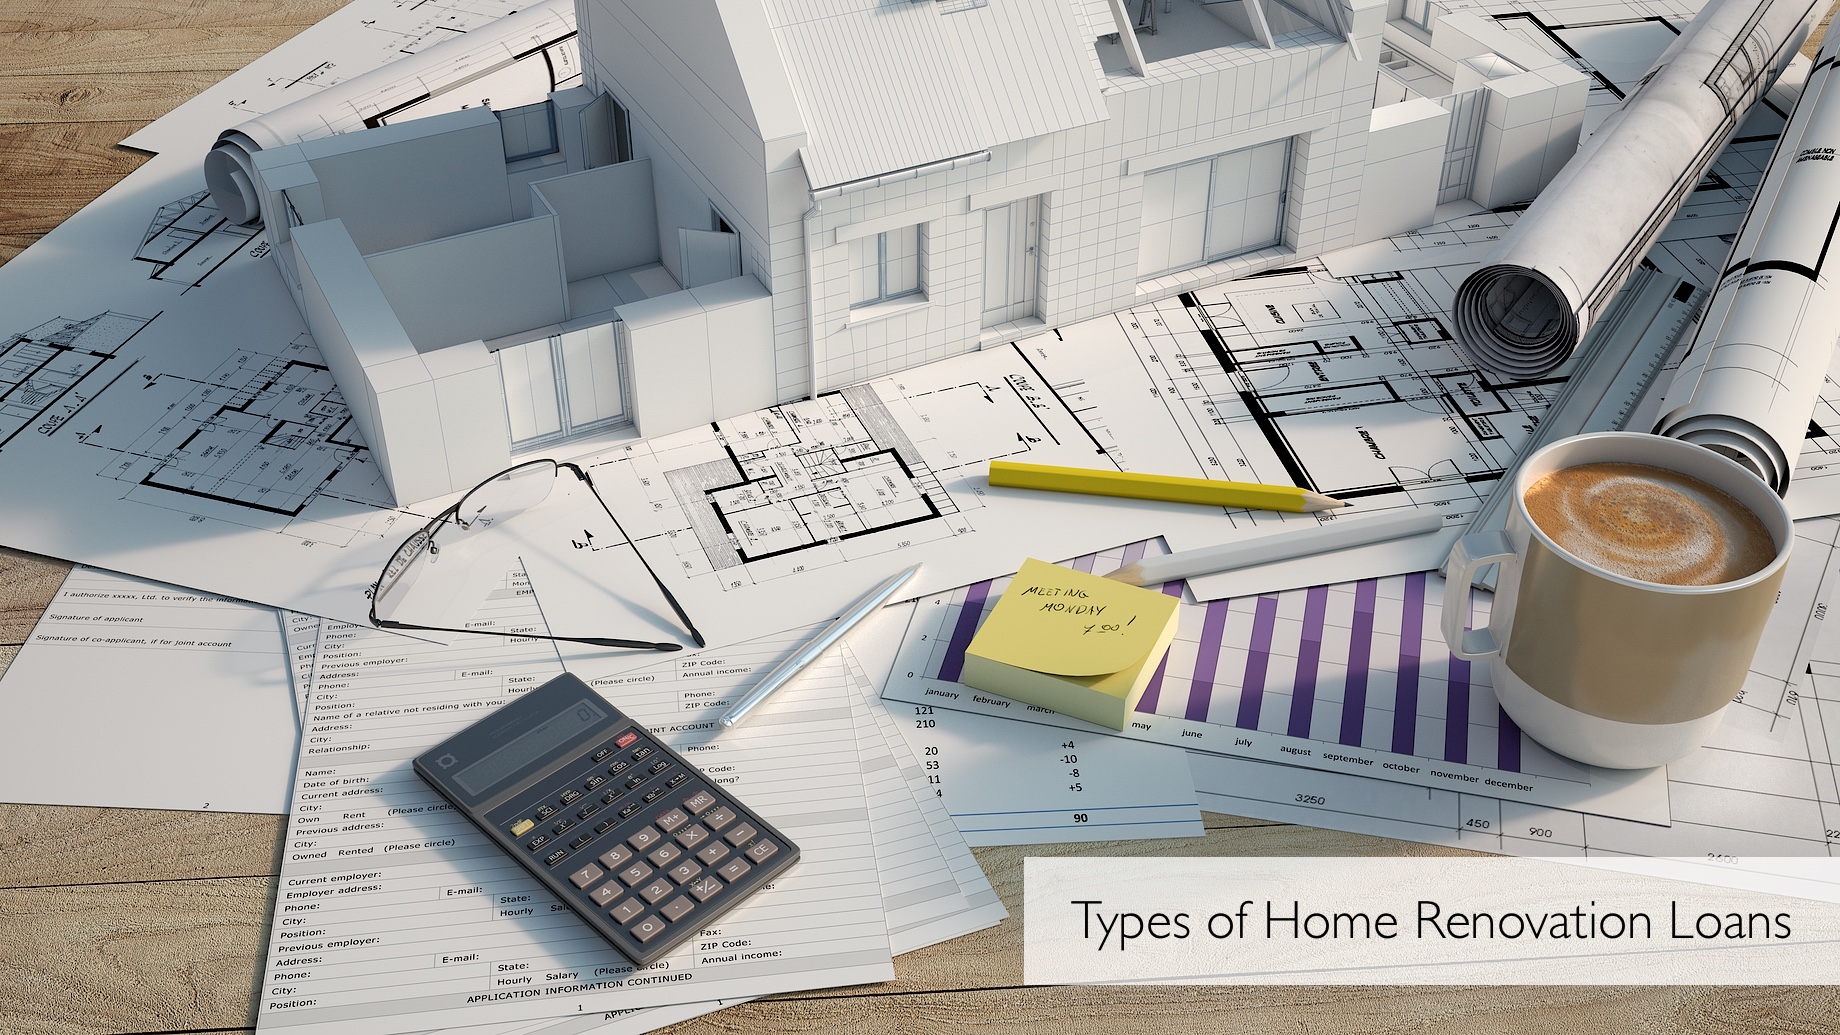 Types of Home Renovation Loans